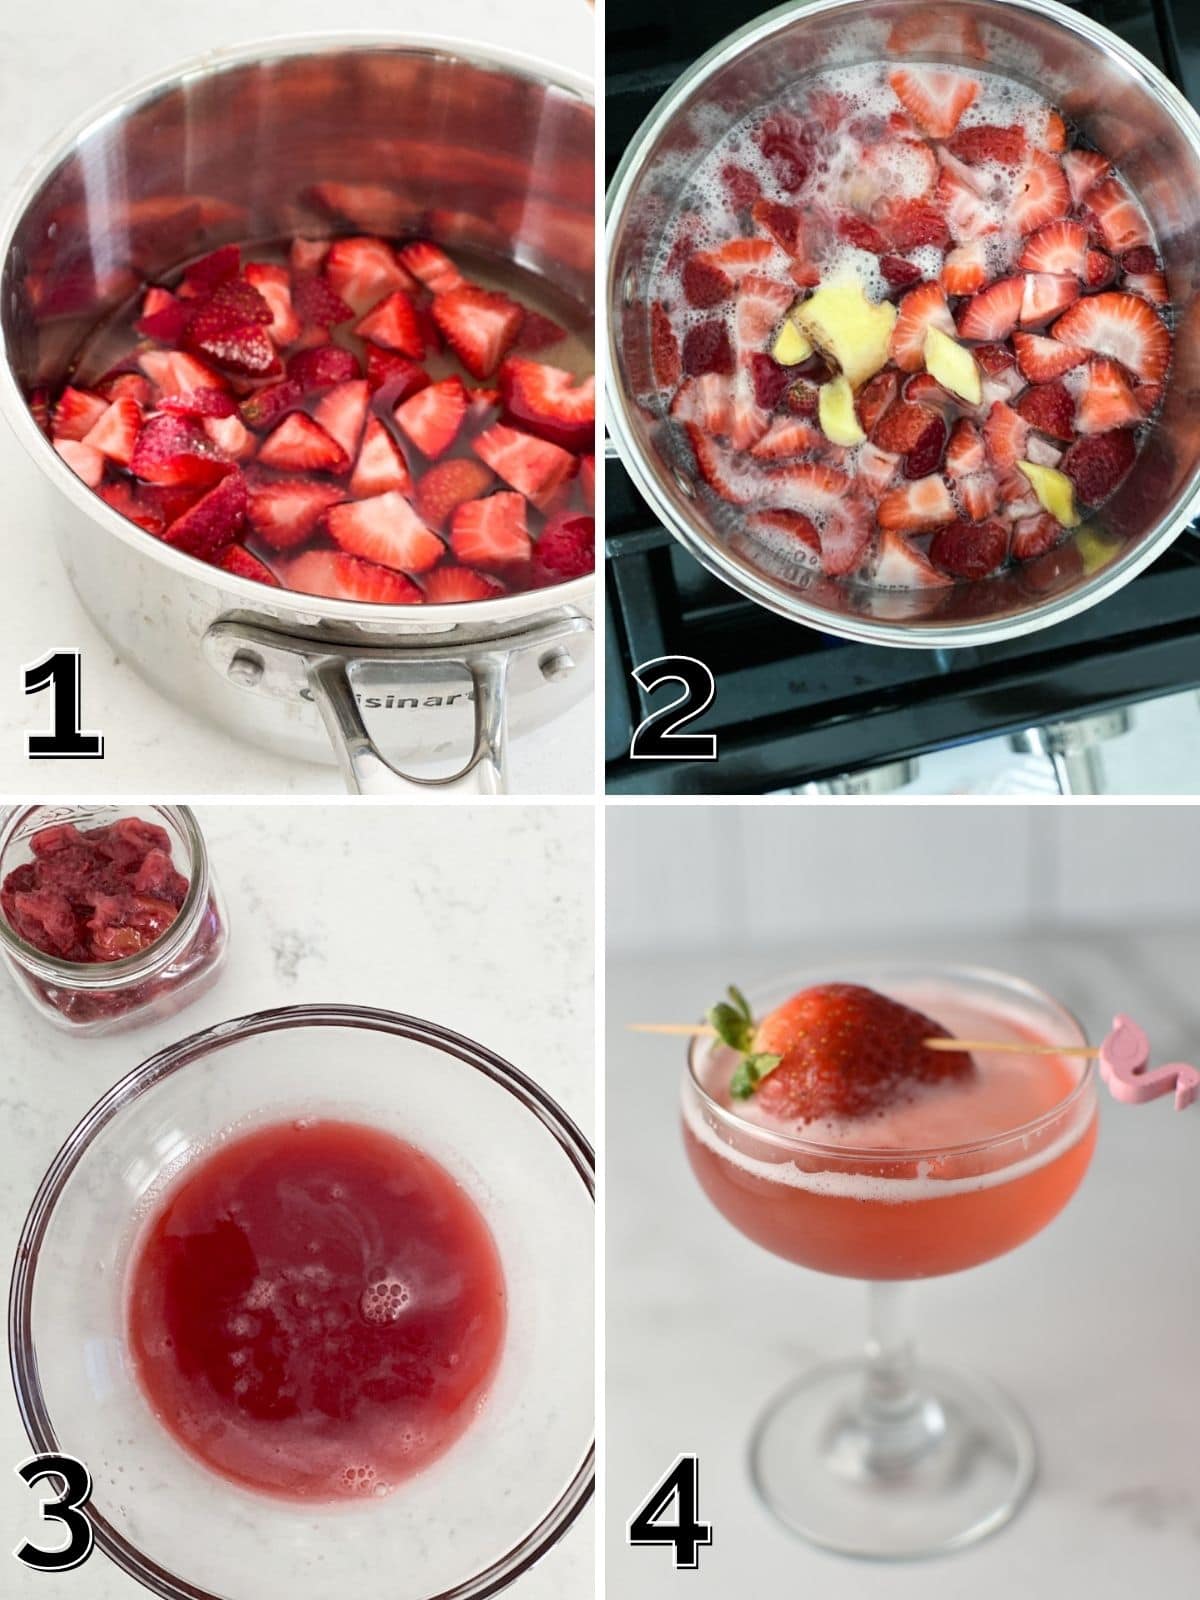 A step by step process of combining strawberries, sugar, and water, simmering them, and straining out the liquid to make syrup. 